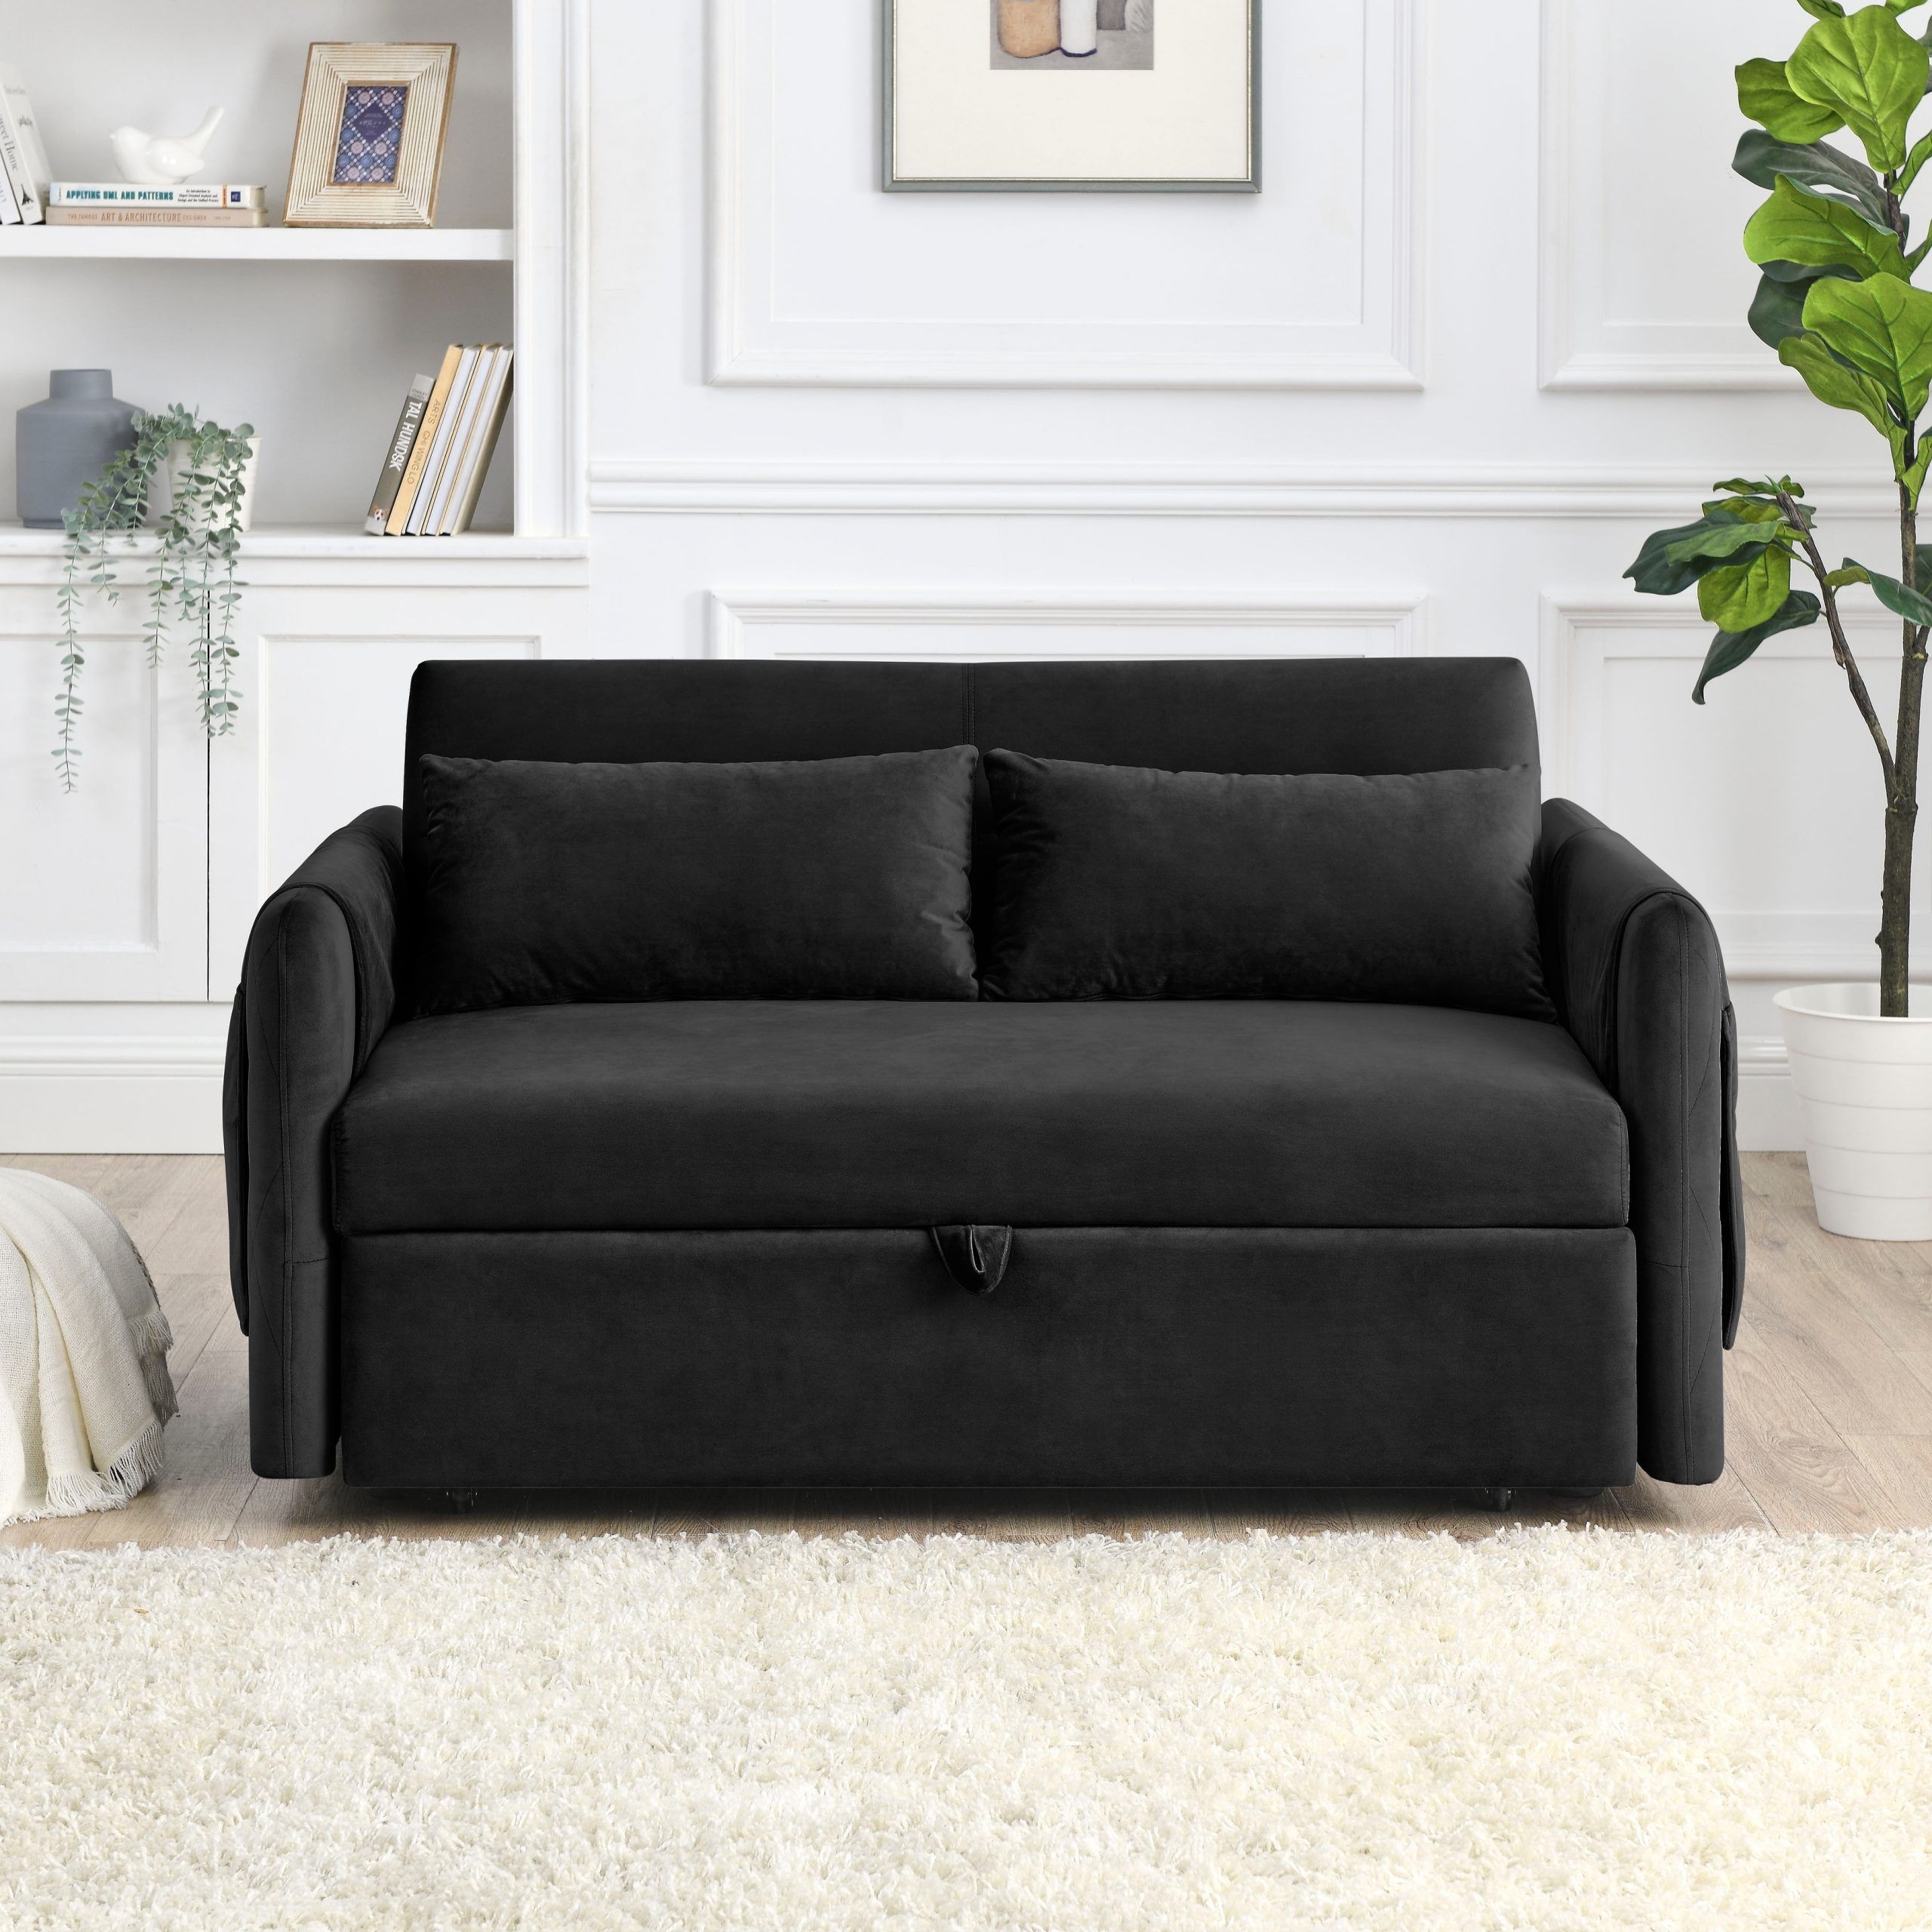 Velvet Loveseat Sofa With Pull Out Bed And 2 Pillow – On Sale – Bed Bath &  Beyond – 37157566 Throughout 2 Seater Black Velvet Sofa Beds (View 12 of 15)